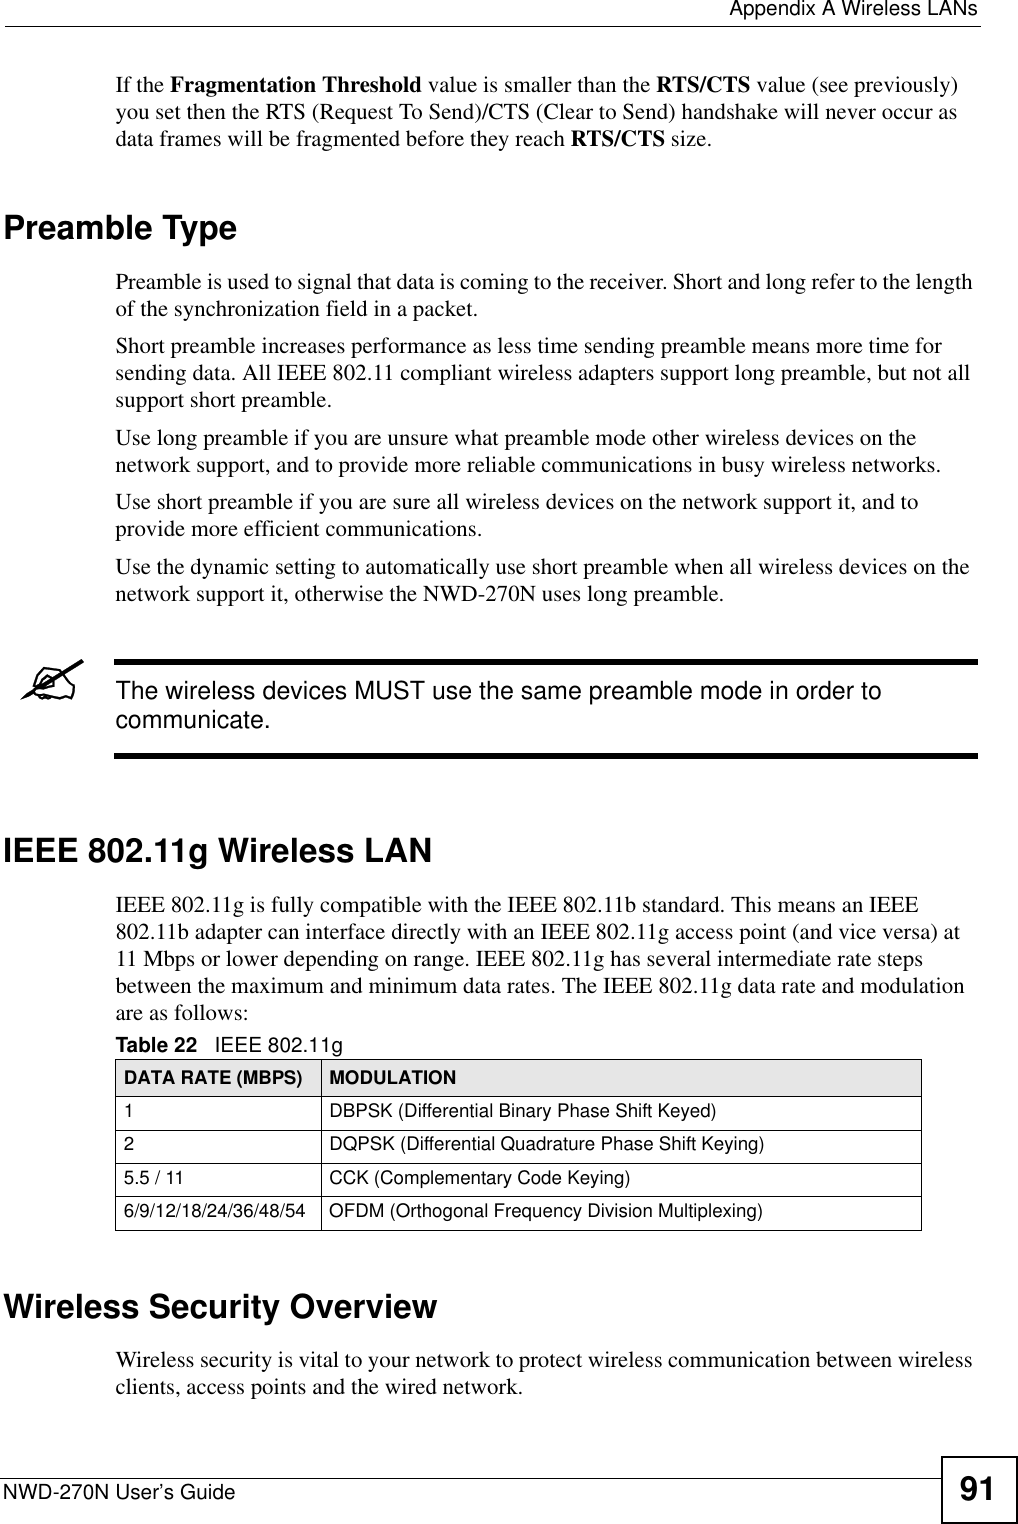  Appendix A Wireless LANsNWD-270N User’s Guide 91If the Fragmentation Threshold value is smaller than the RTS/CTS value (see previously) you set then the RTS (Request To Send)/CTS (Clear to Send) handshake will never occur as data frames will be fragmented before they reach RTS/CTS size.Preamble TypePreamble is used to signal that data is coming to the receiver. Short and long refer to the length of the synchronization field in a packet.Short preamble increases performance as less time sending preamble means more time for sending data. All IEEE 802.11 compliant wireless adapters support long preamble, but not all support short preamble. Use long preamble if you are unsure what preamble mode other wireless devices on the network support, and to provide more reliable communications in busy wireless networks. Use short preamble if you are sure all wireless devices on the network support it, and to provide more efficient communications.Use the dynamic setting to automatically use short preamble when all wireless devices on the network support it, otherwise the NWD-270N uses long preamble.&quot;The wireless devices MUST use the same preamble mode in order to communicate.IEEE 802.11g Wireless LANIEEE 802.11g is fully compatible with the IEEE 802.11b standard. This means an IEEE 802.11b adapter can interface directly with an IEEE 802.11g access point (and vice versa) at 11 Mbps or lower depending on range. IEEE 802.11g has several intermediate rate steps between the maximum and minimum data rates. The IEEE 802.11g data rate and modulation are as follows:Wireless Security OverviewWireless security is vital to your network to protect wireless communication between wireless clients, access points and the wired network.Table 22   IEEE 802.11gDATA RATE (MBPS) MODULATION1 DBPSK (Differential Binary Phase Shift Keyed)2 DQPSK (Differential Quadrature Phase Shift Keying)5.5 / 11 CCK (Complementary Code Keying) 6/9/12/18/24/36/48/54 OFDM (Orthogonal Frequency Division Multiplexing) 